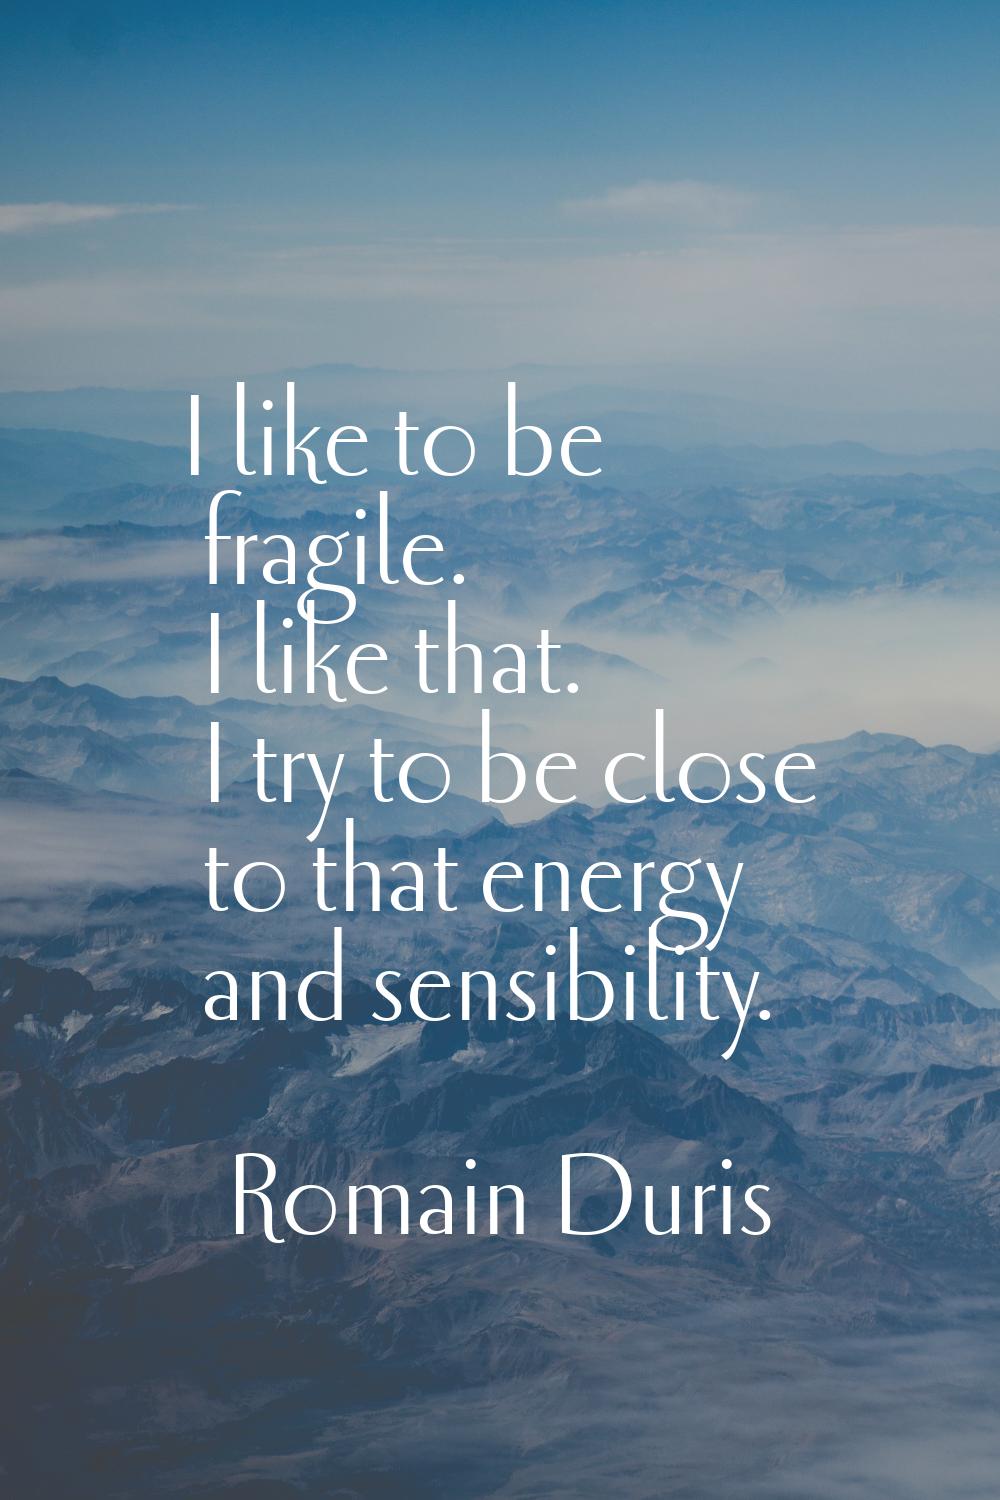 I like to be fragile. I like that. I try to be close to that energy and sensibility.